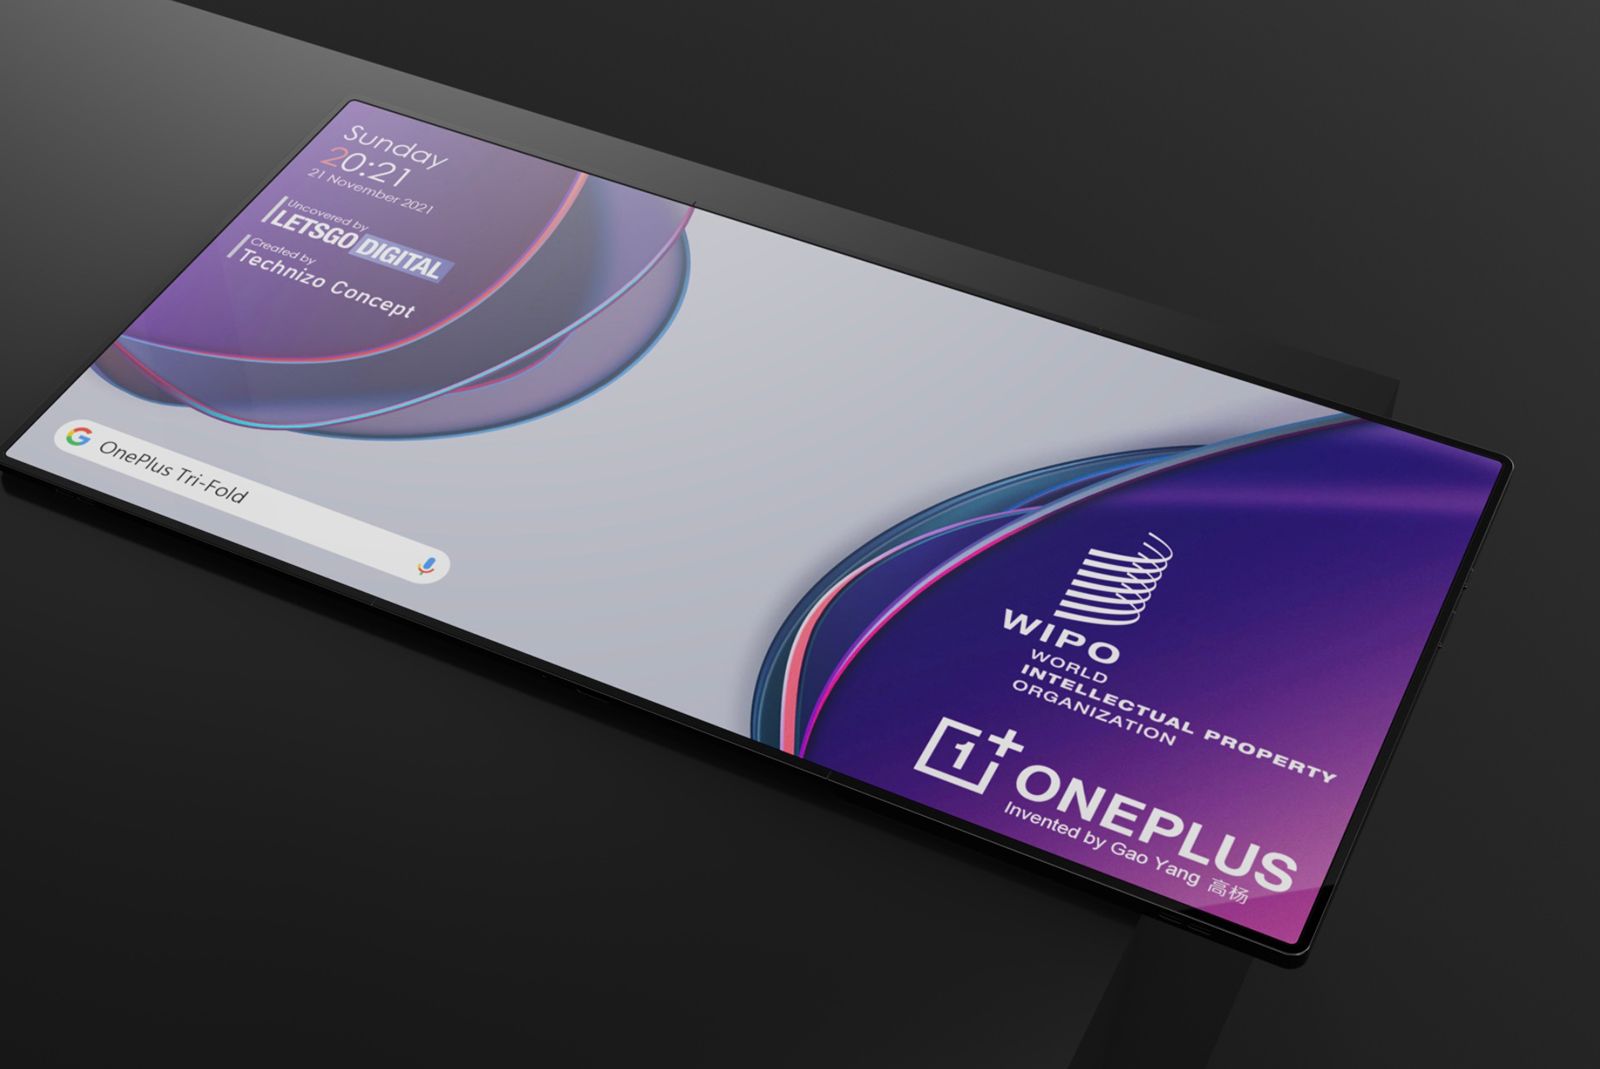 Is this what OnePlus' tri-fold smartphone would look like if it ever debuts? photo 2